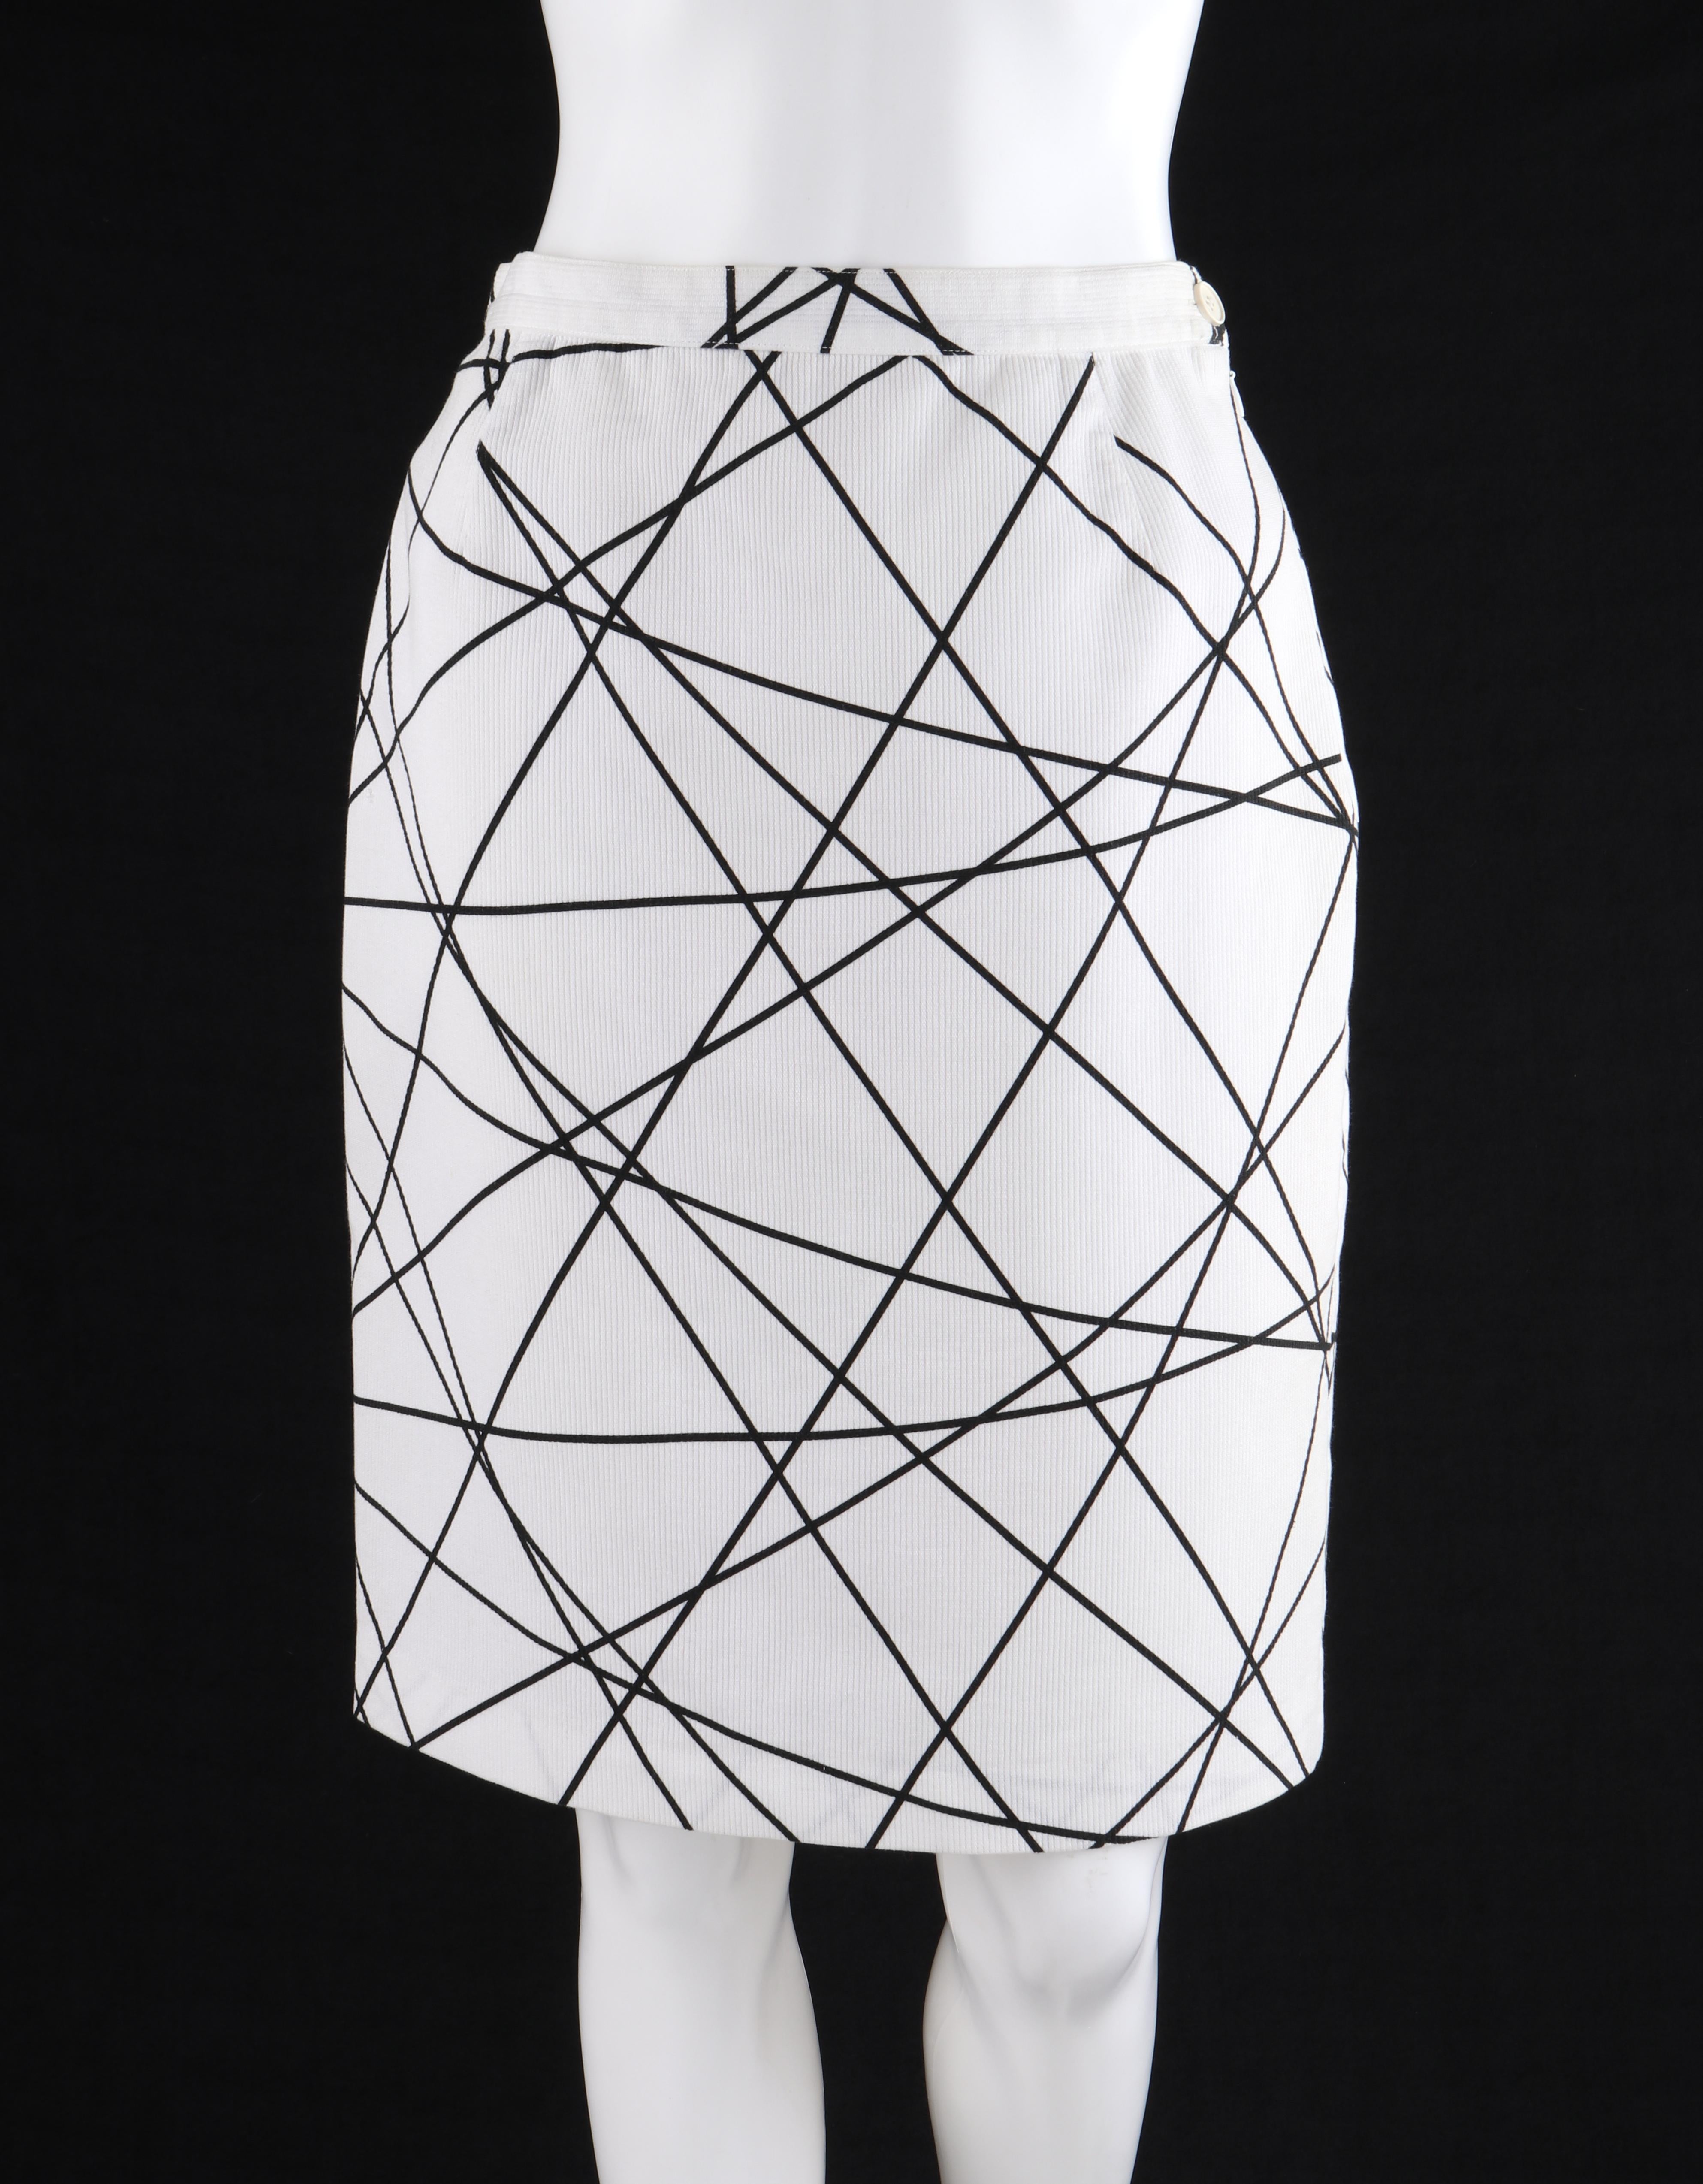 COURREGES c.1980’s White Black Geometric Abstract Print Ribbed Sheath Skirt
 
Circa: 1980’s
Label(s): Courreges Paris
Designer: Andre Courreges
Style: Sheath skirt 
Color(s): Black and white
Lined: No
Marked Fabric Content: “80% Cotton, 20%